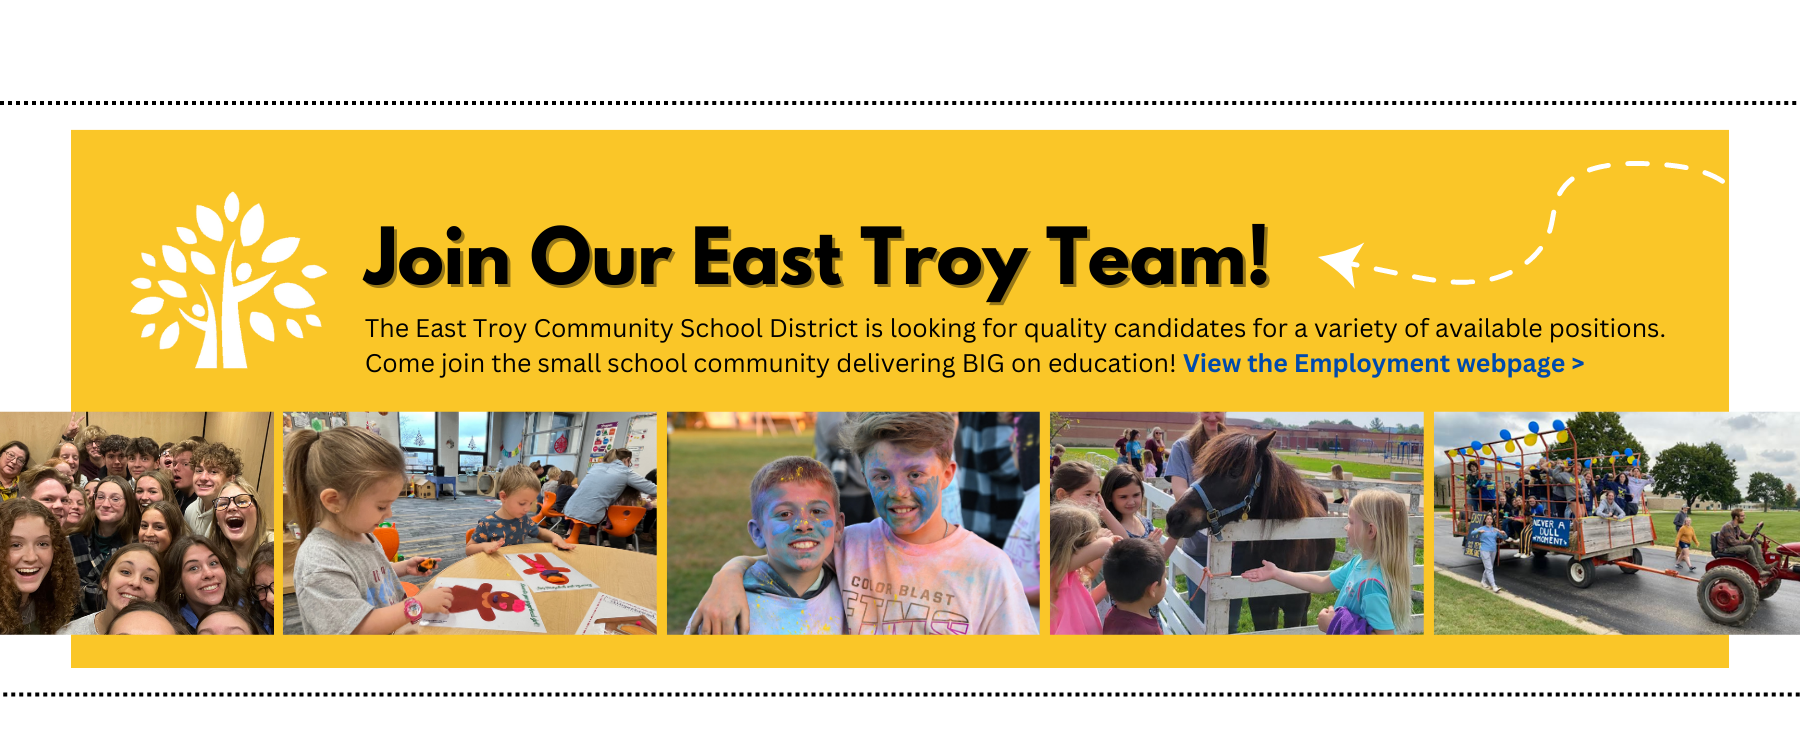 Join Our East Troy Team